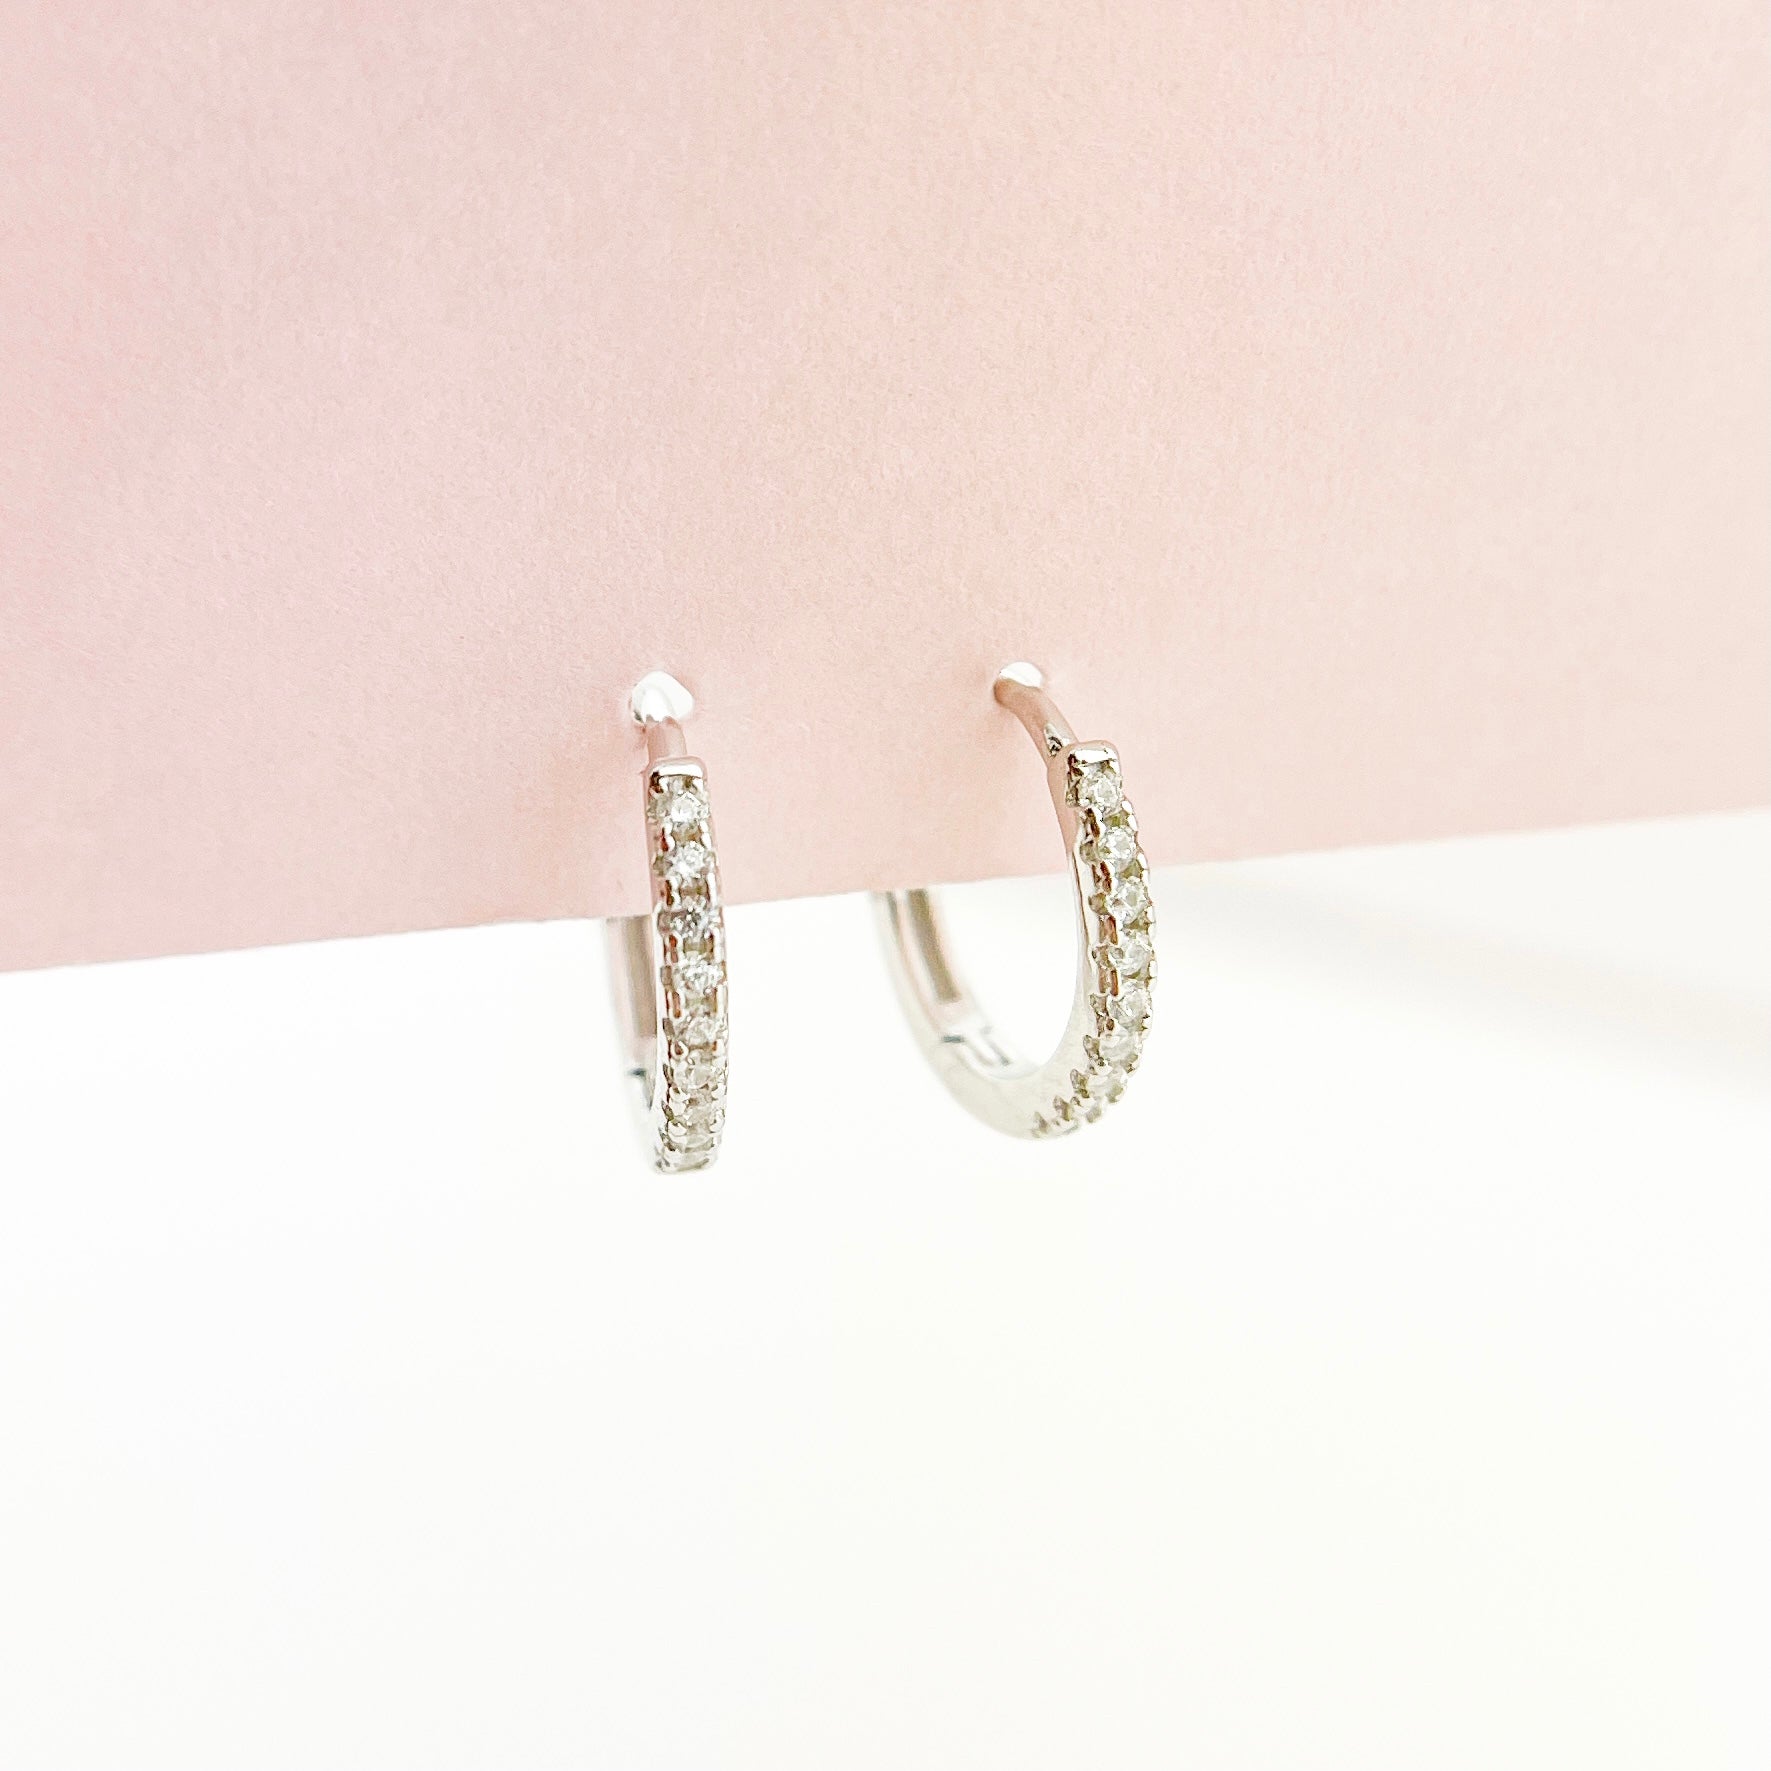 Adeline Hoops in Silver - Flaire & Co.